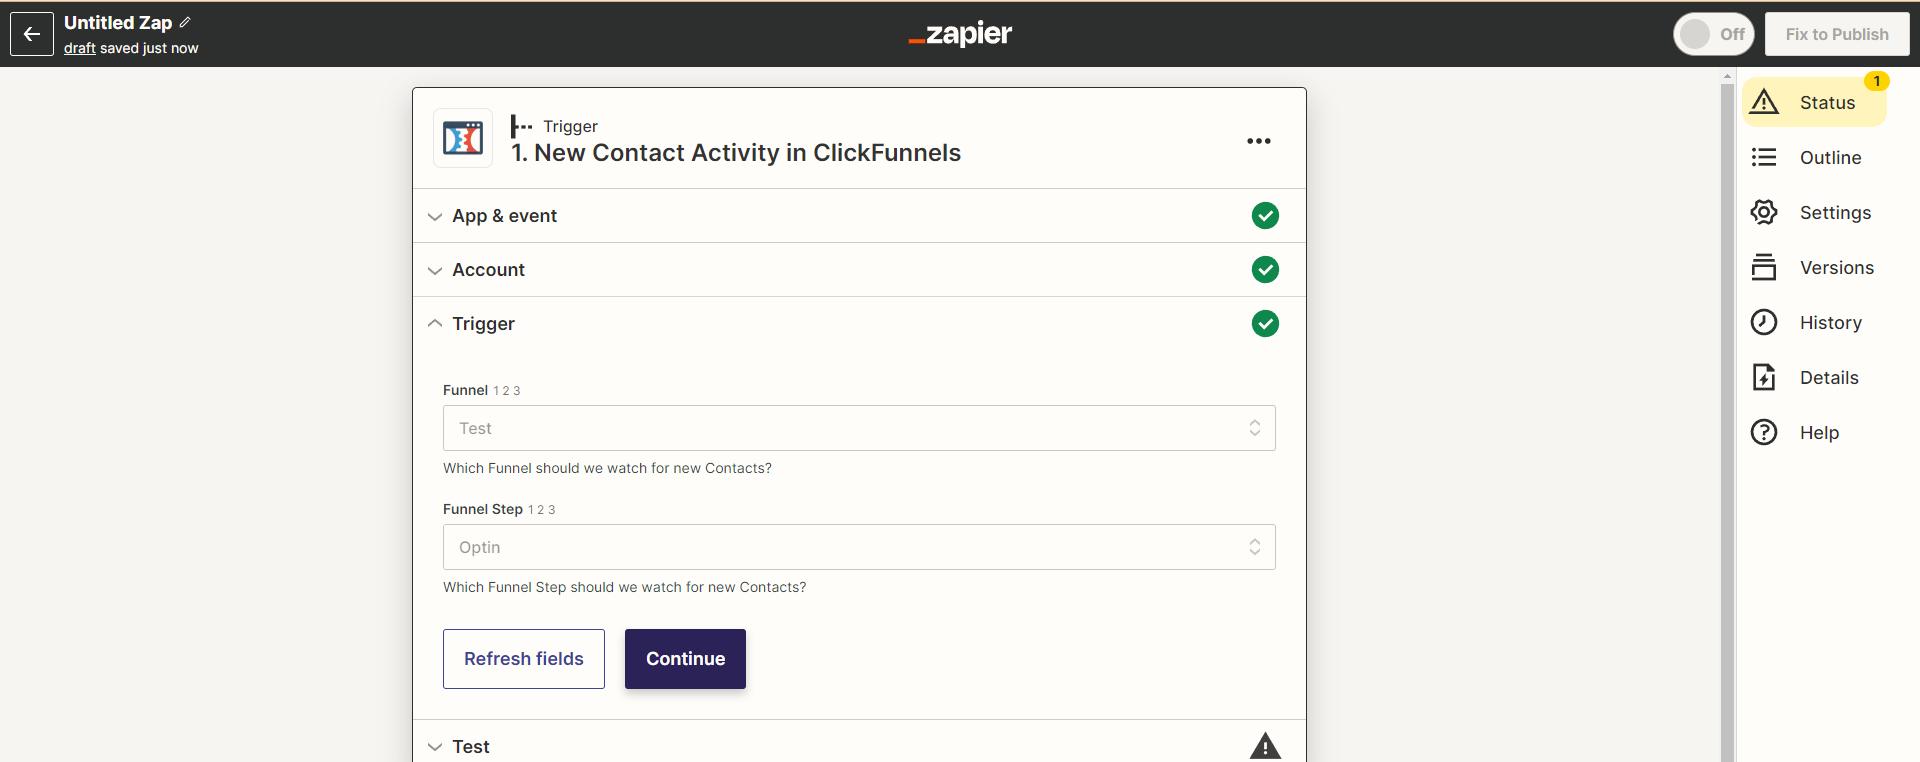 Connecting Funnel with Zappier